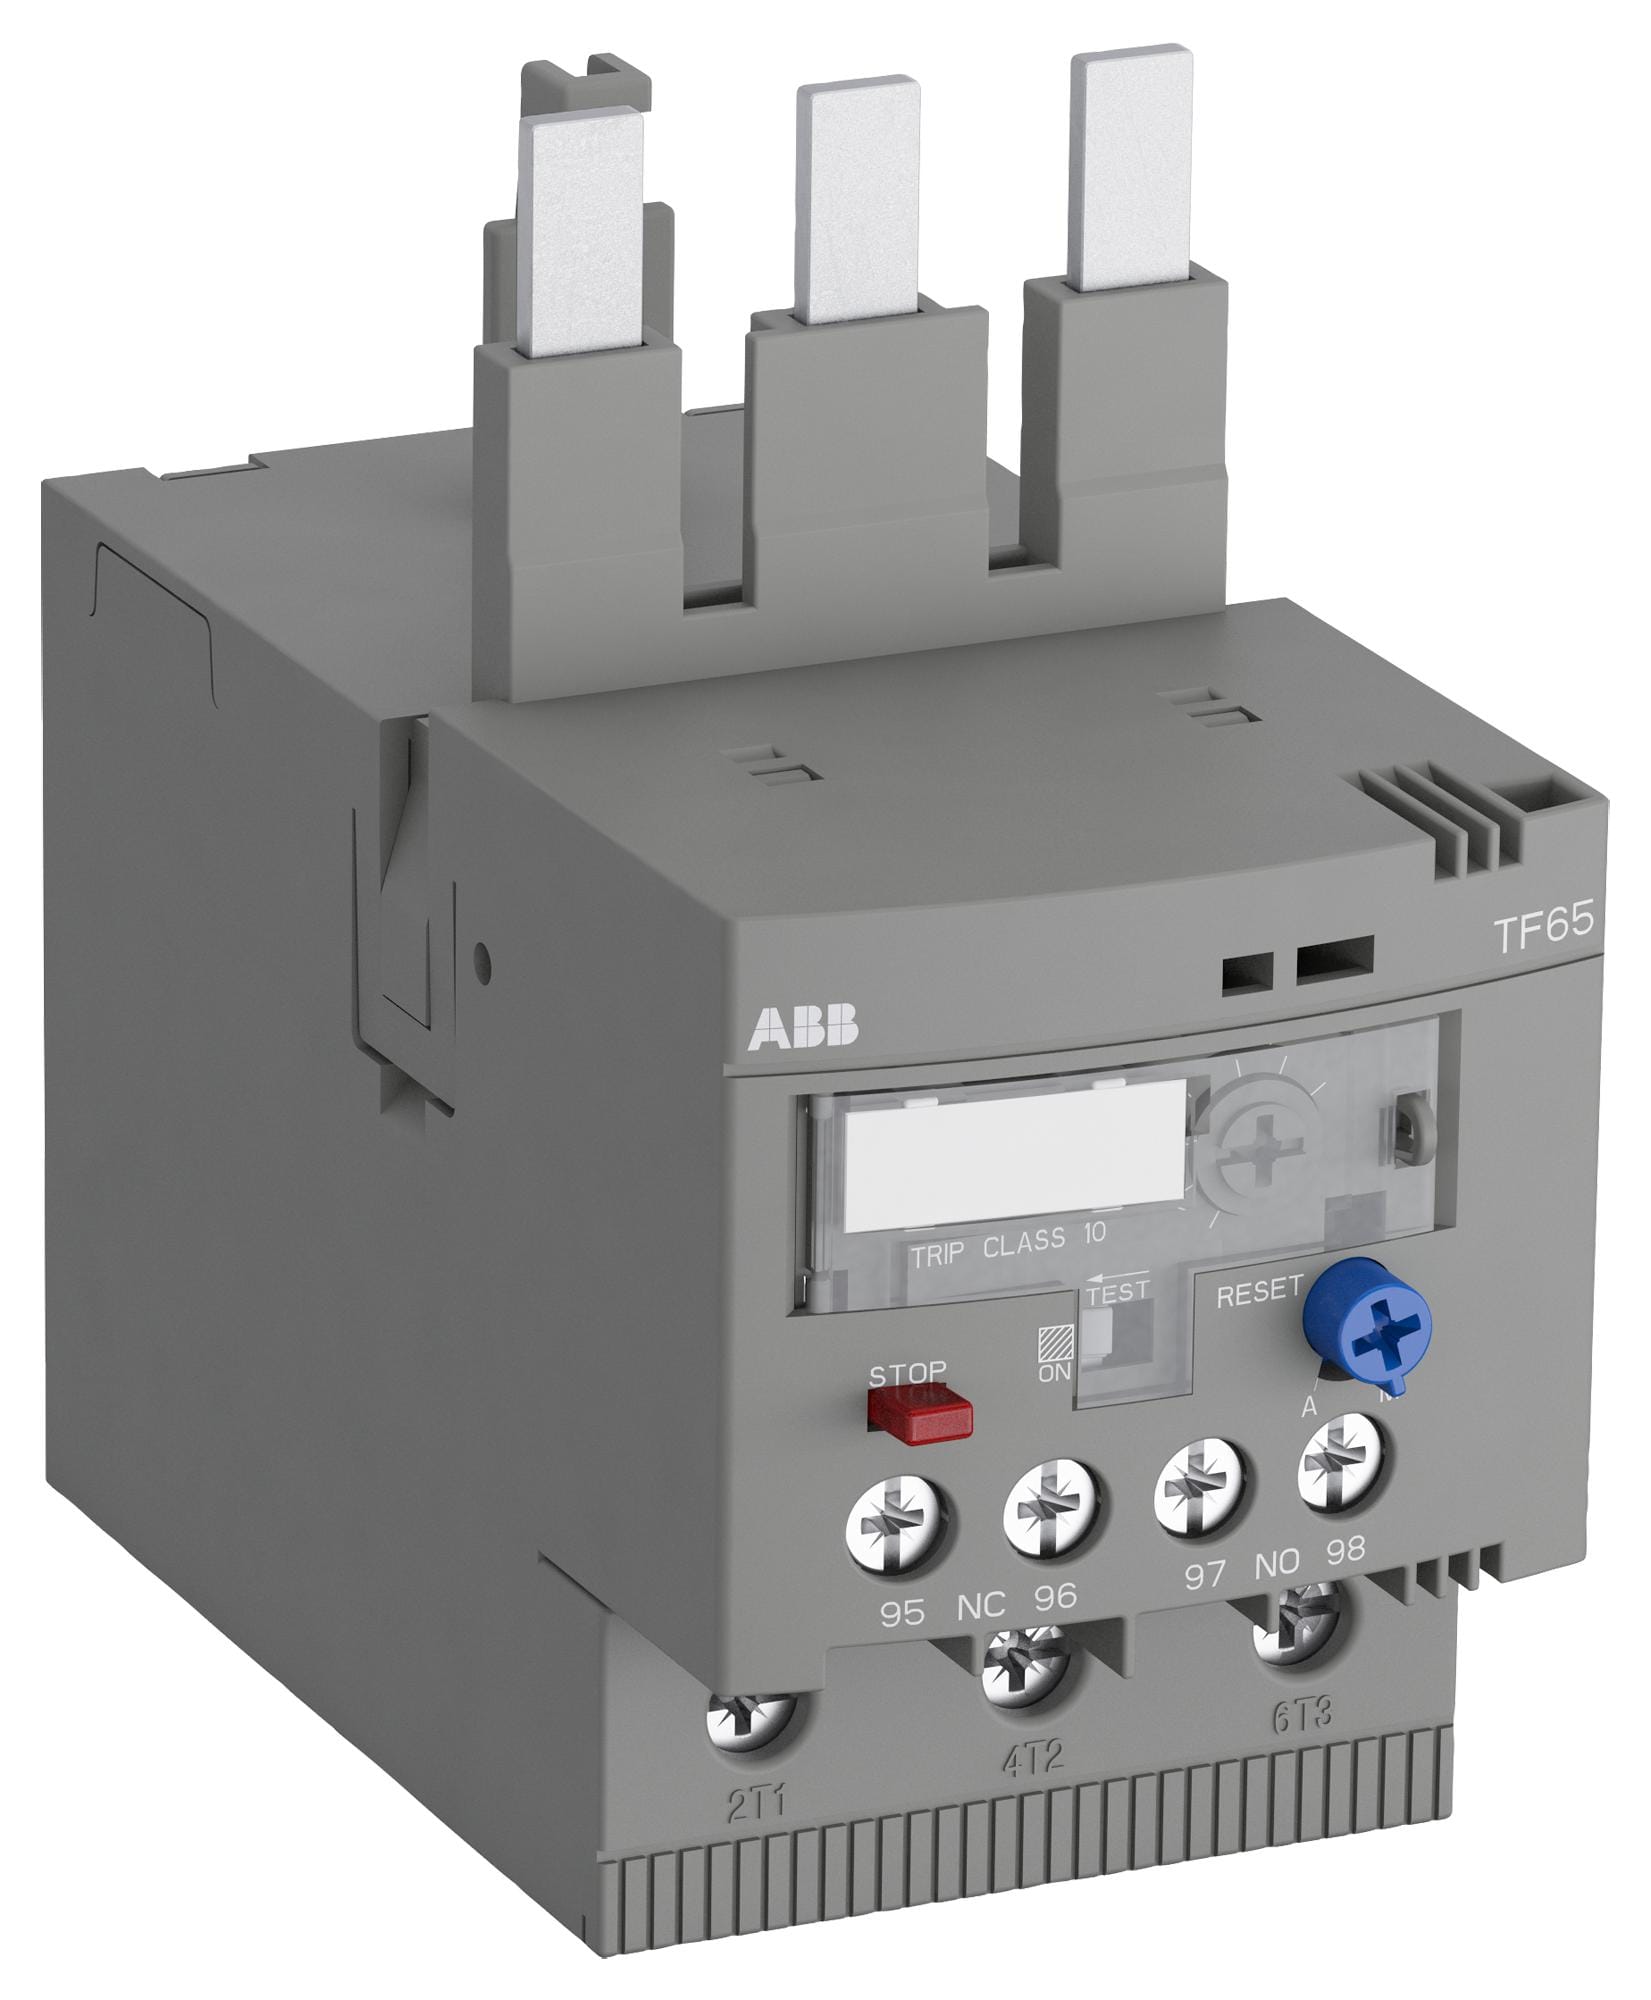 ABB Thermal Overload TF65-40 THERMAL OVERLOAD RELAY, 3 POLE, 690V ABB 2565018 TF65-40